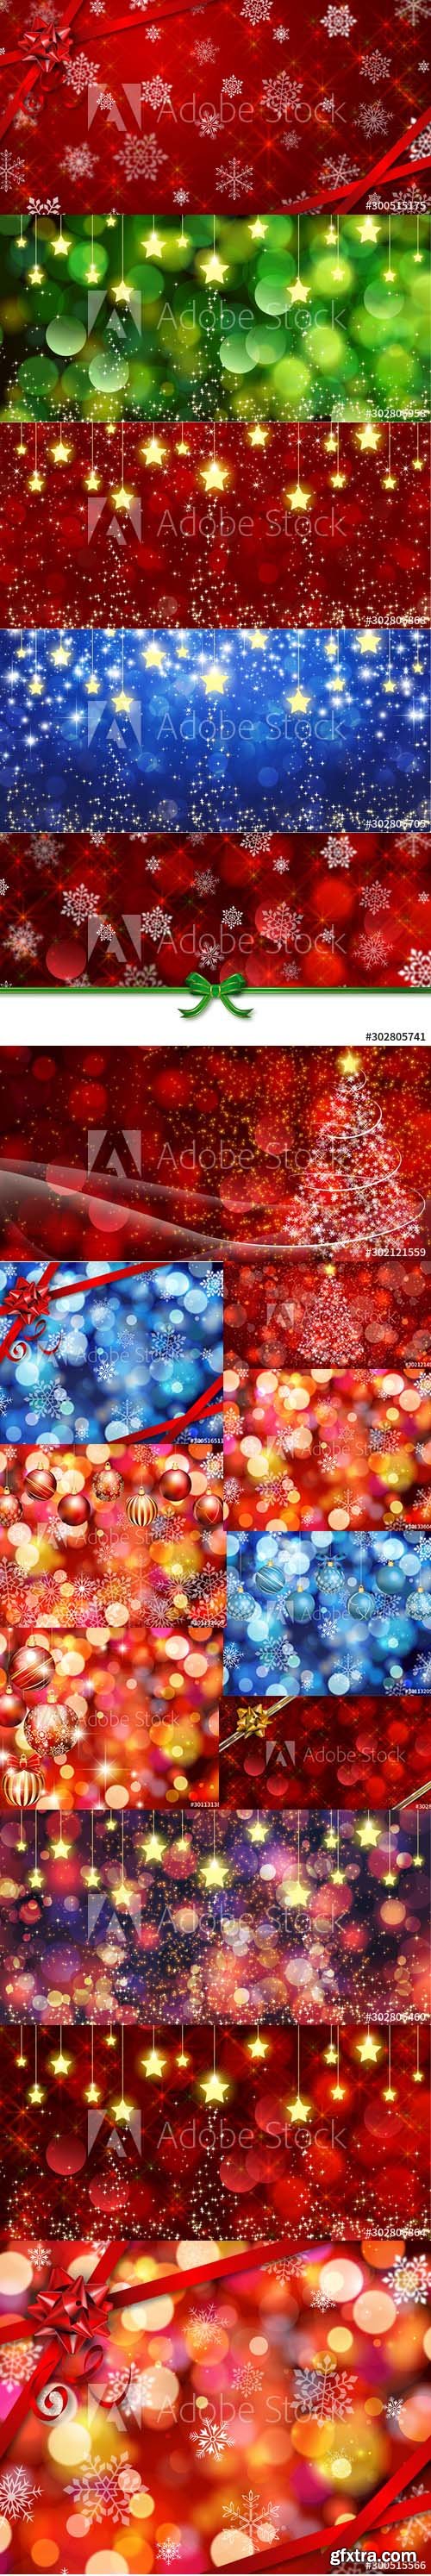 Magic Christmas Backgrounds Pack Vol 3